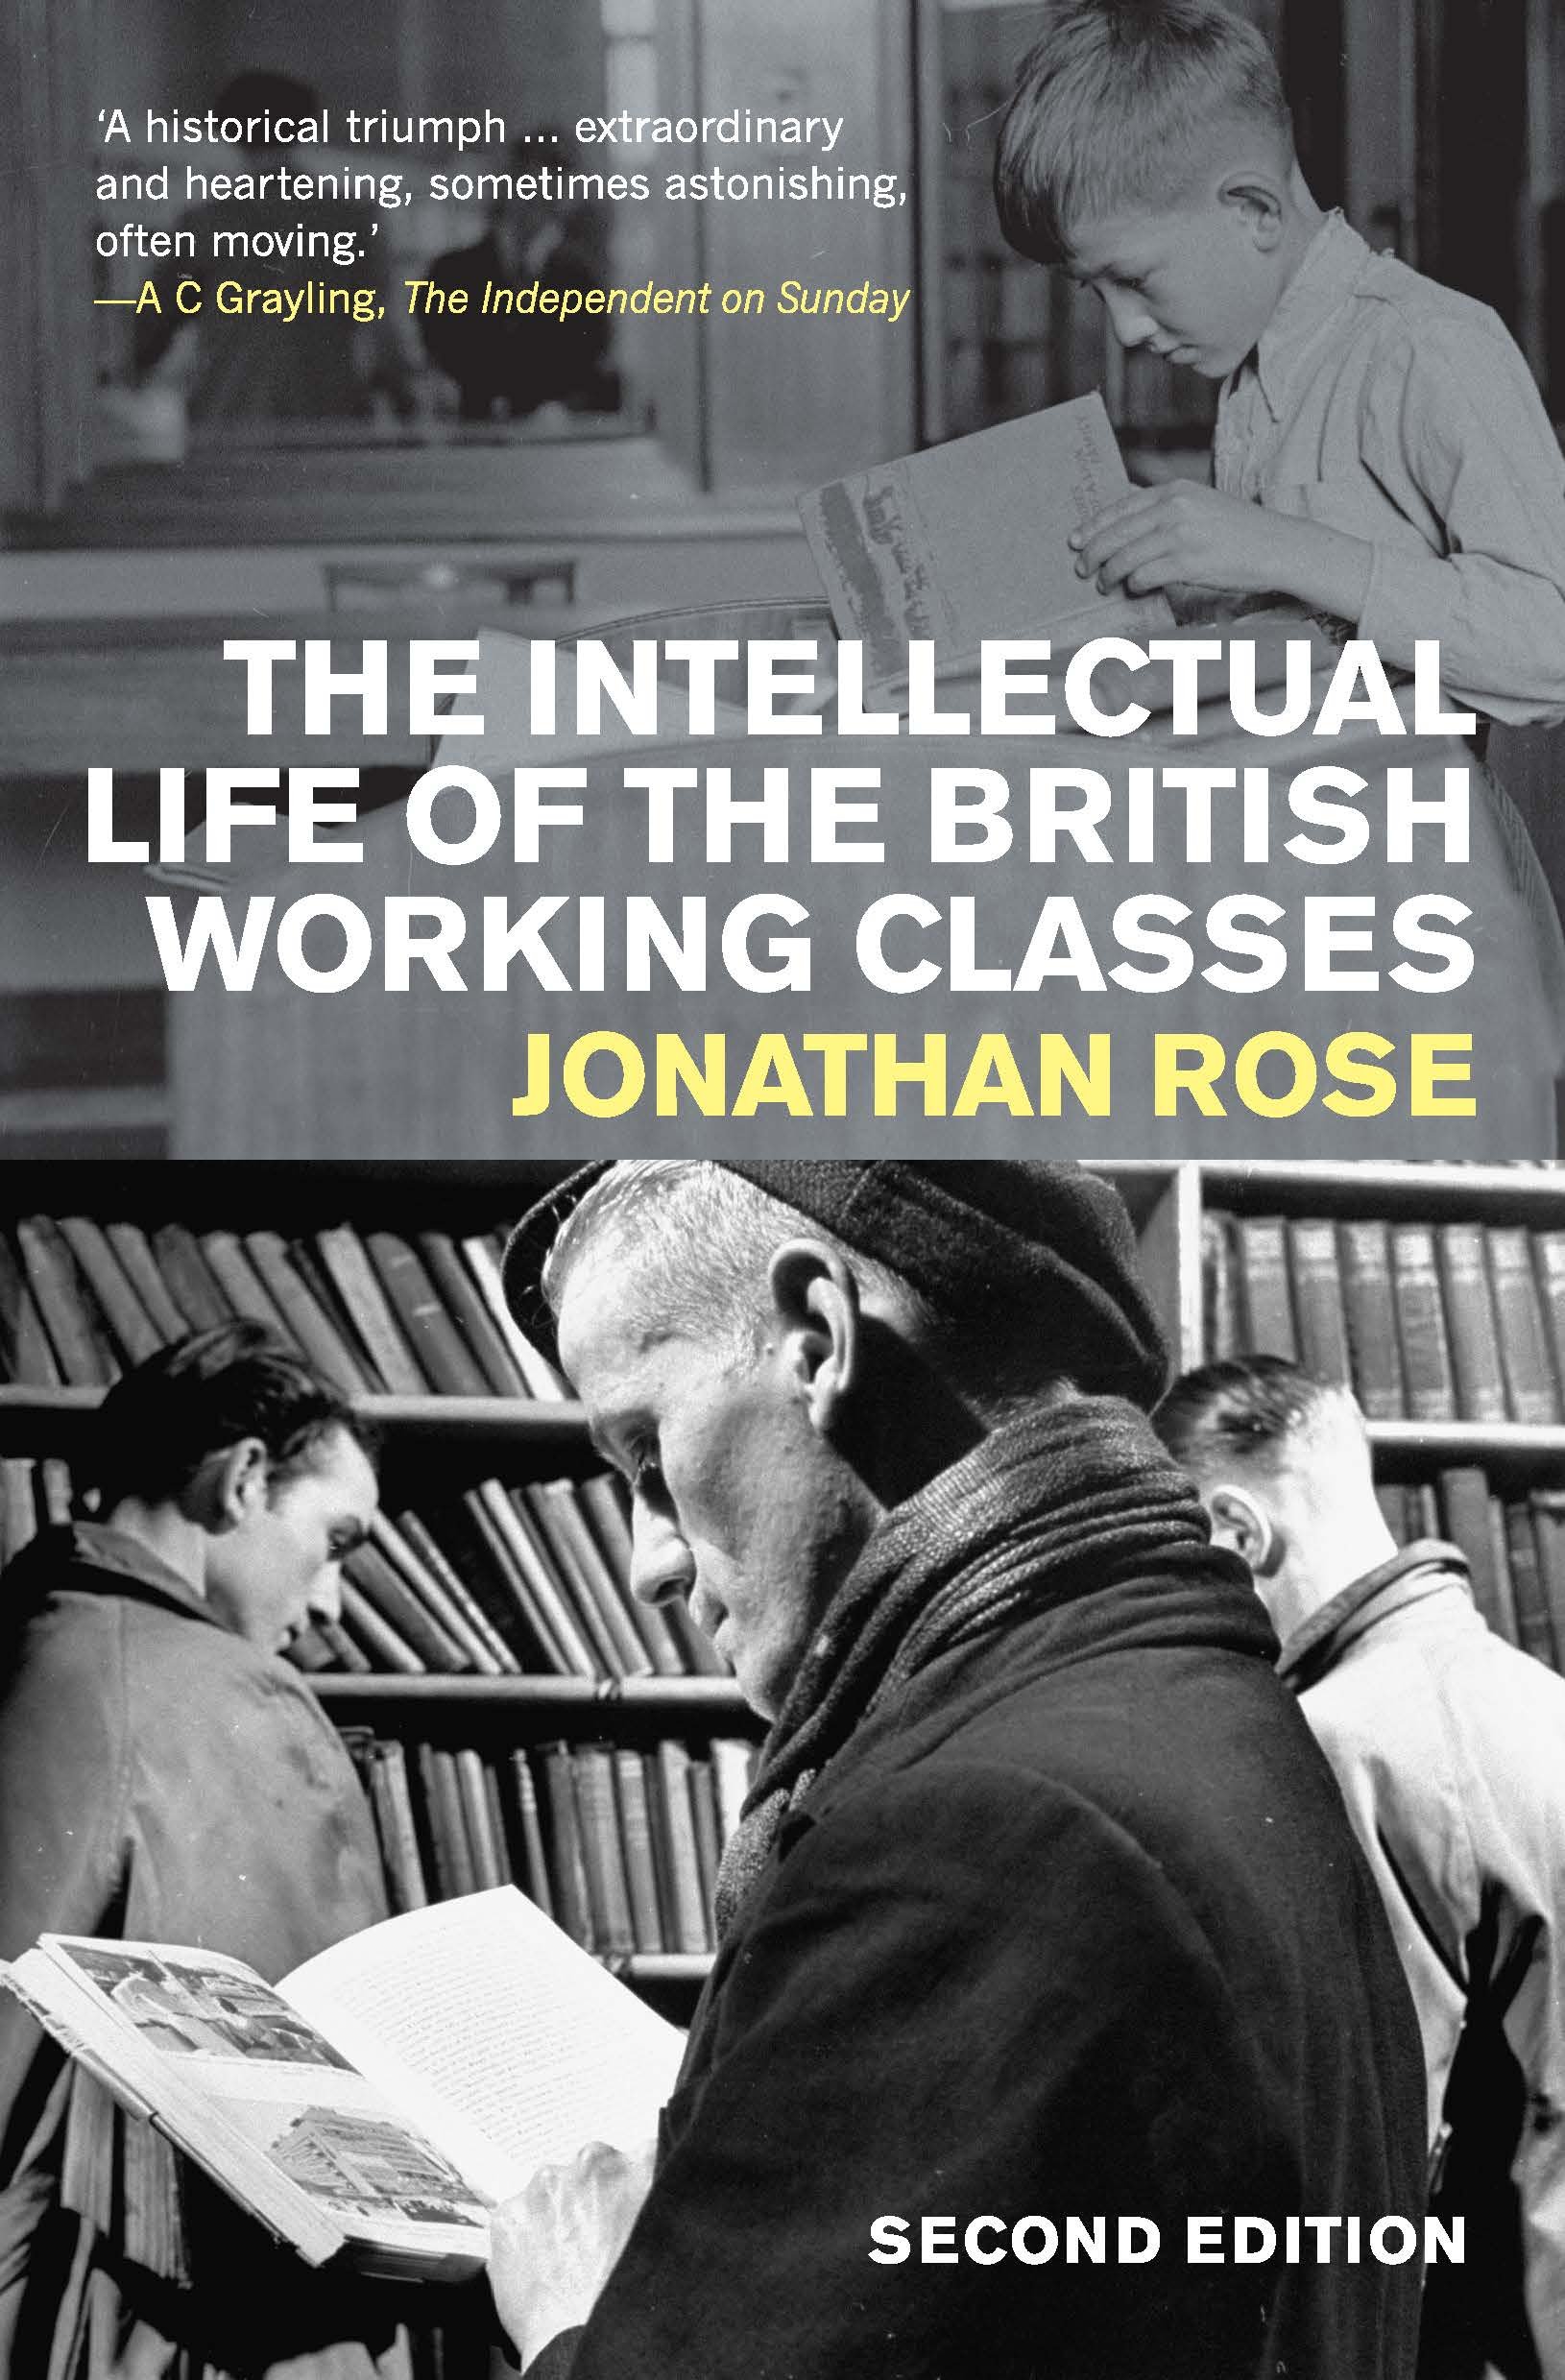 The Intellectual Life of the British Working Classes – The old “audiobooks”